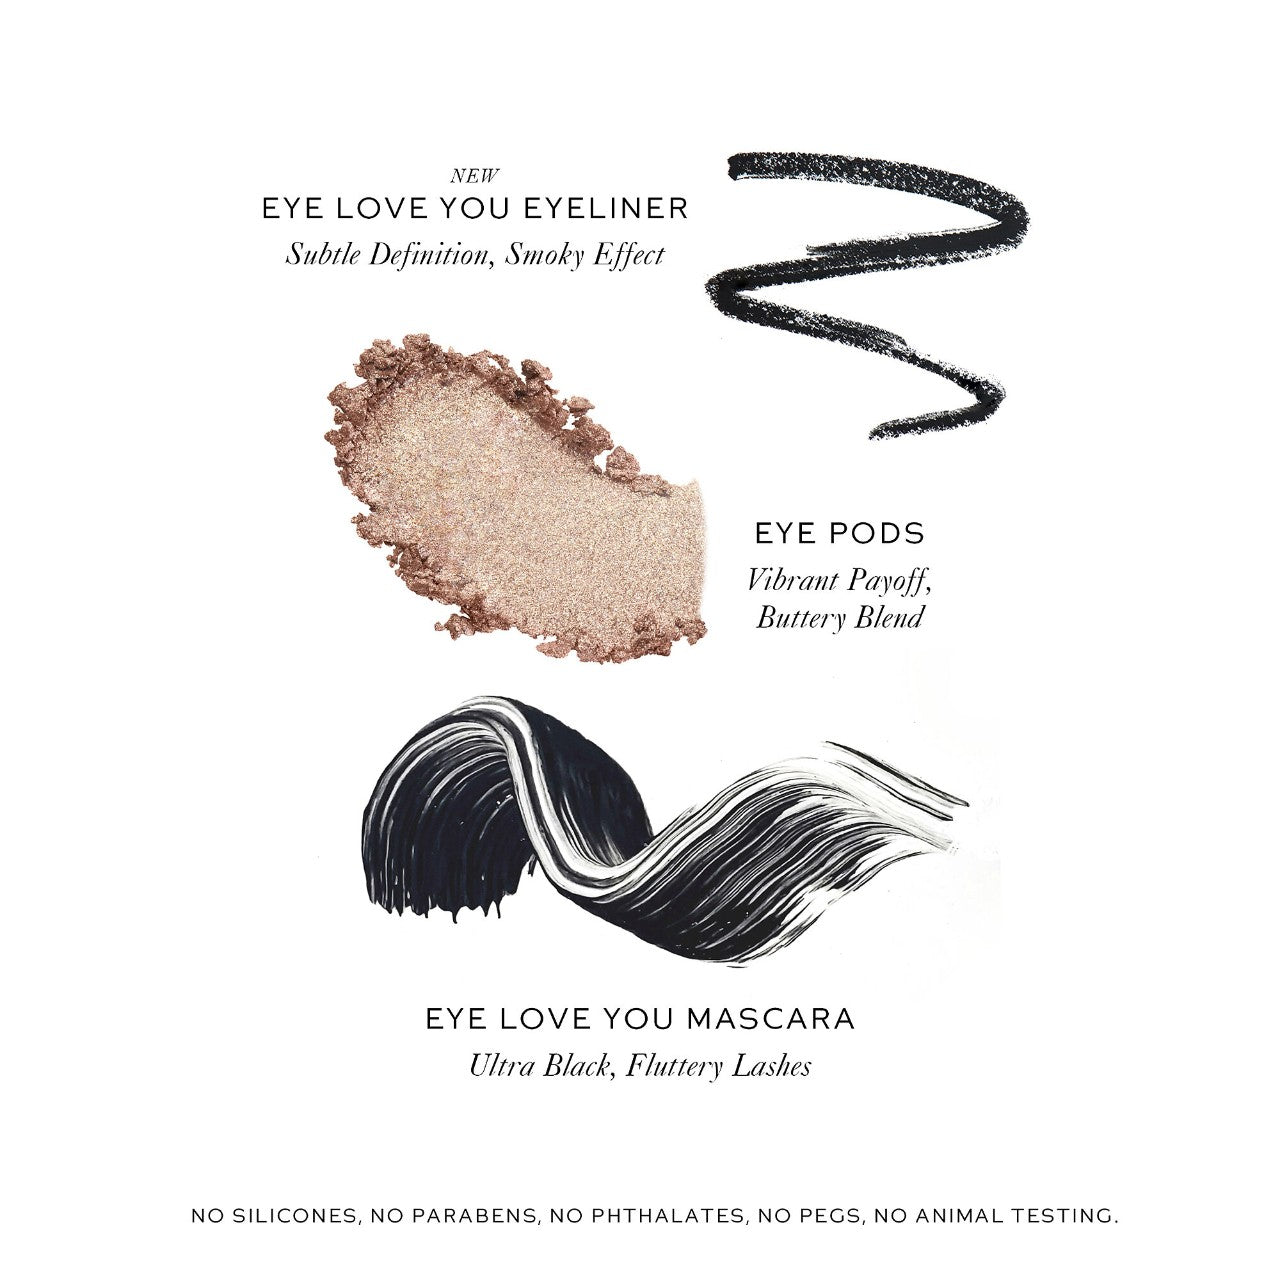 Westman Atelier The Eye Love You Limited Edition Eye Shadow, Eye Liner and Mascara Holiday Gift Set